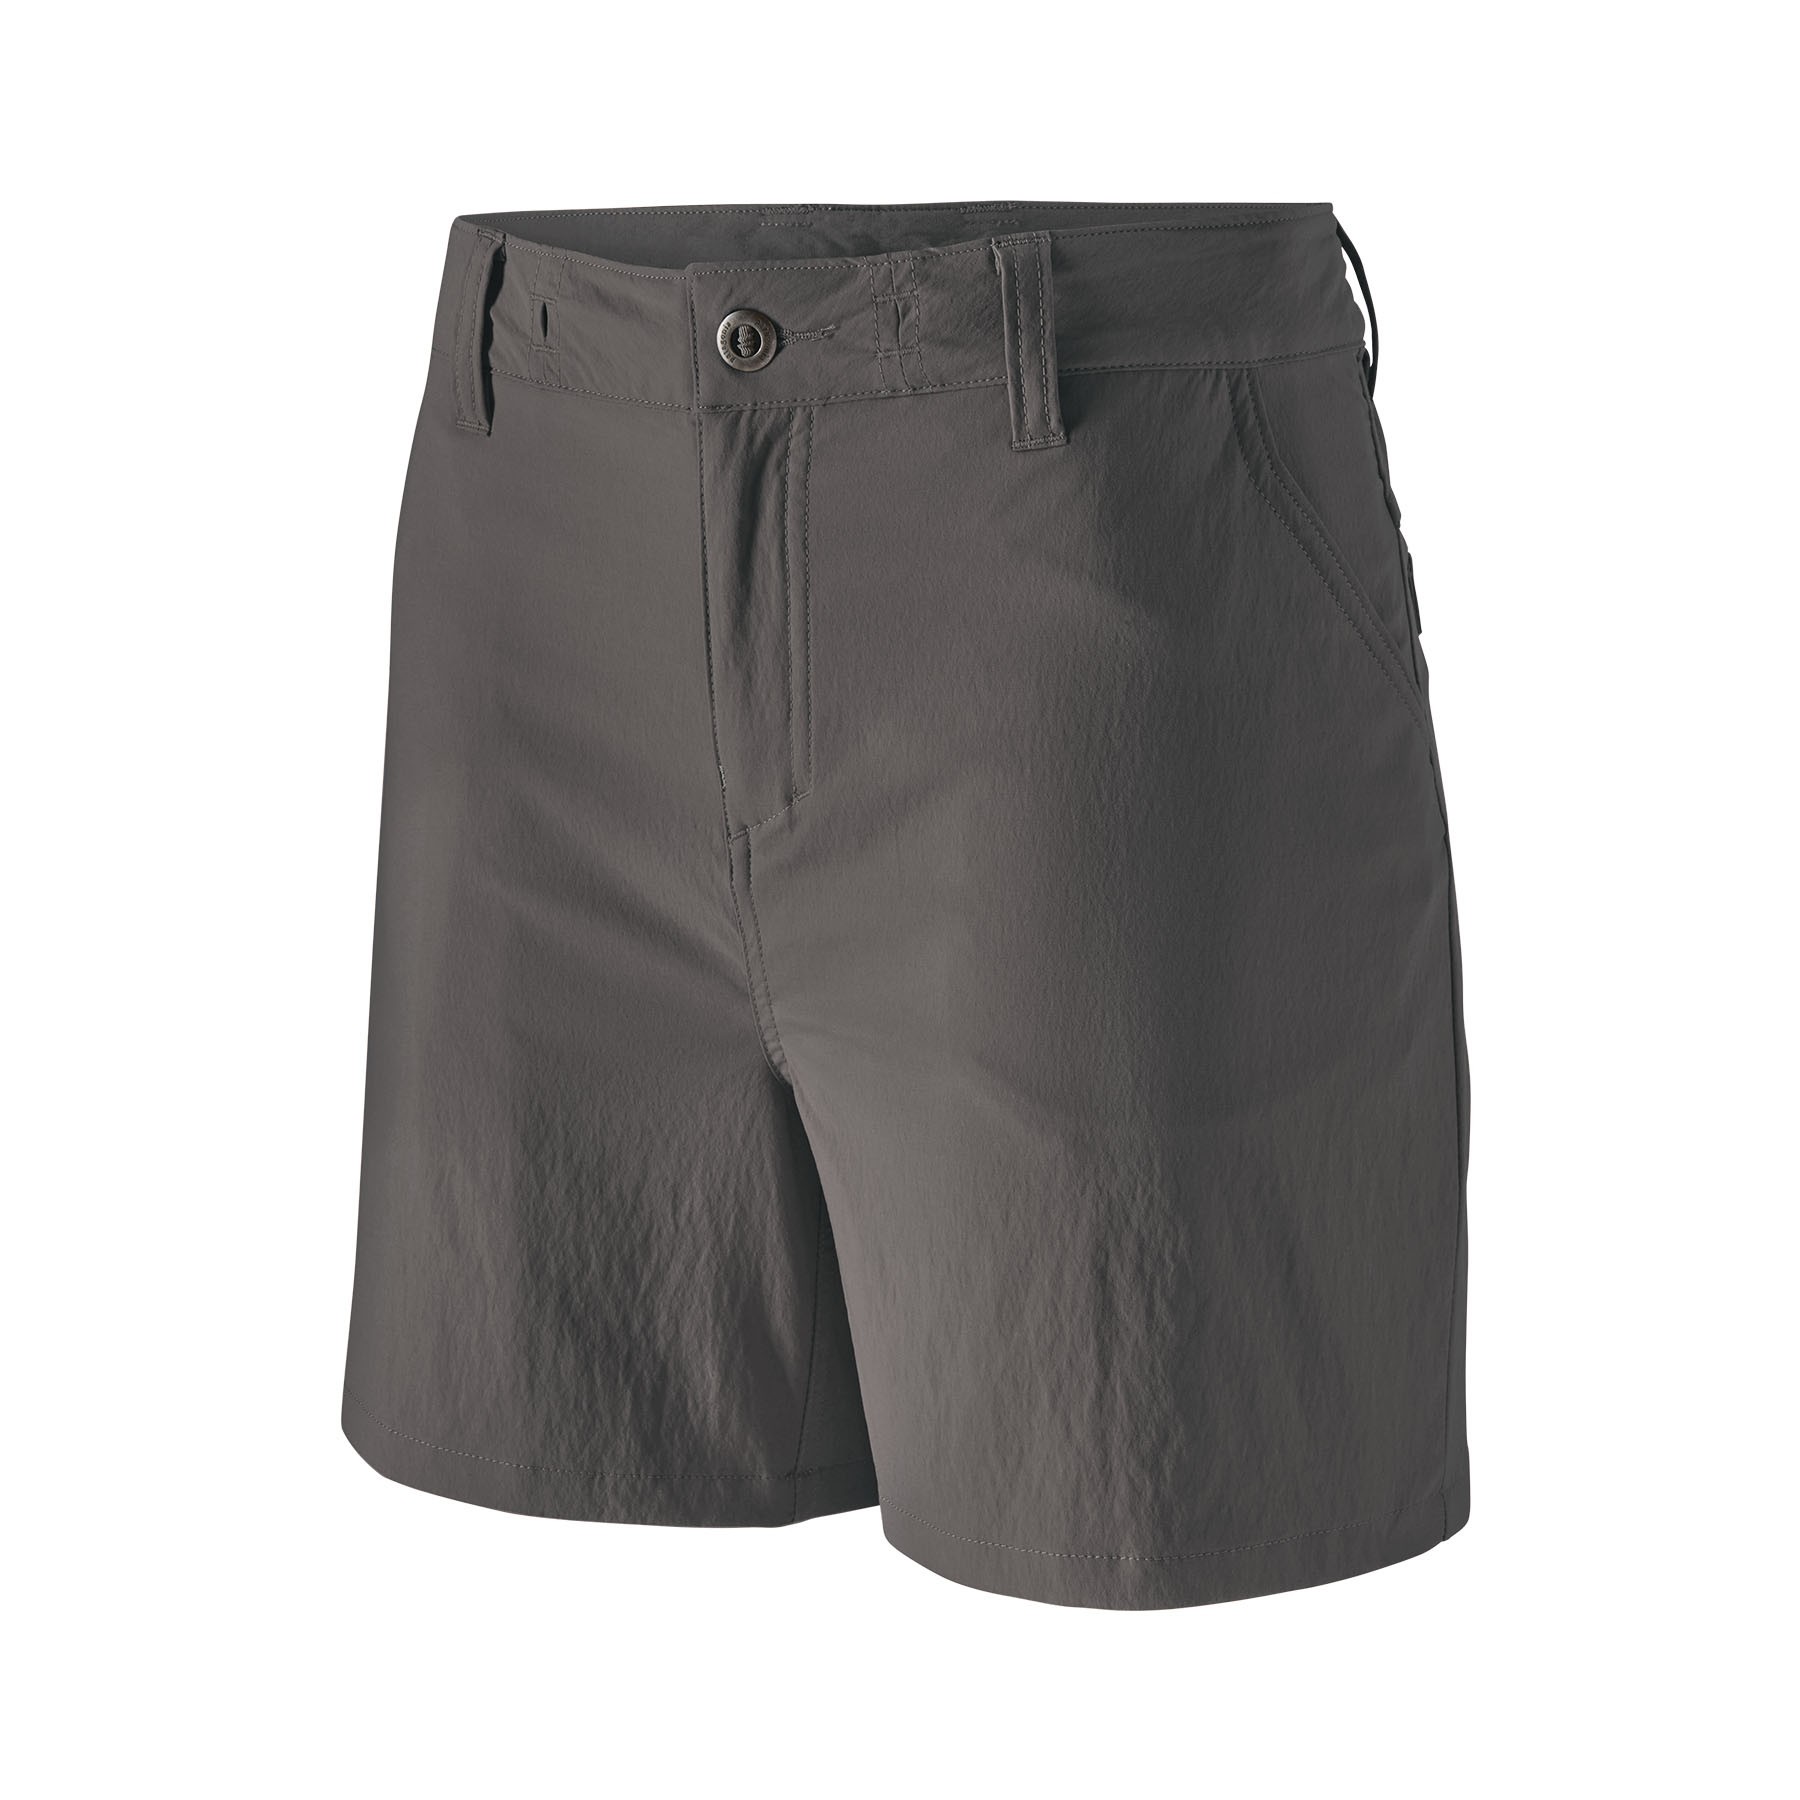 Patagonia Women's Quandary Shorts - 5" : Forge Grey